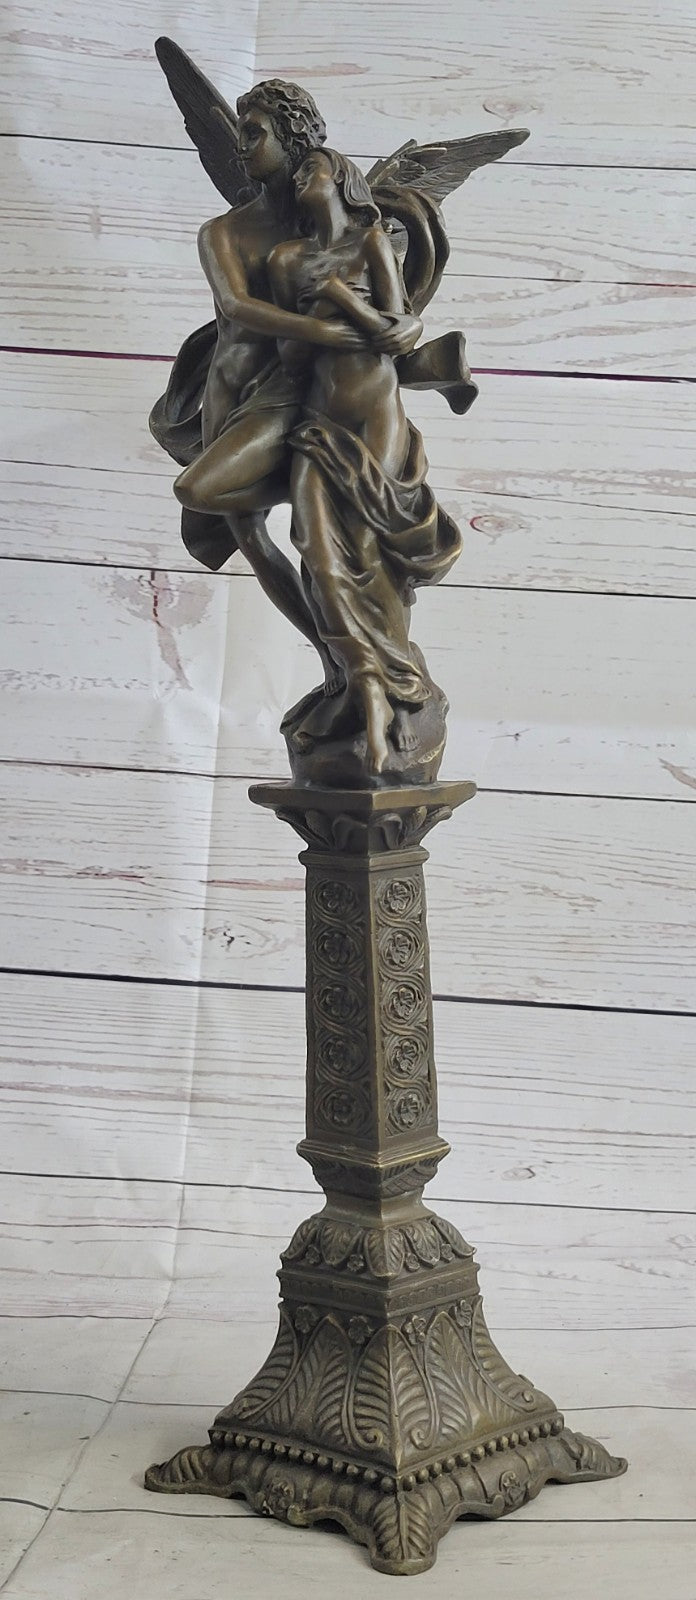 Tall Nude Male Angel Carries Girl Bronze Sculpture Art Nouveau Mythical Deco